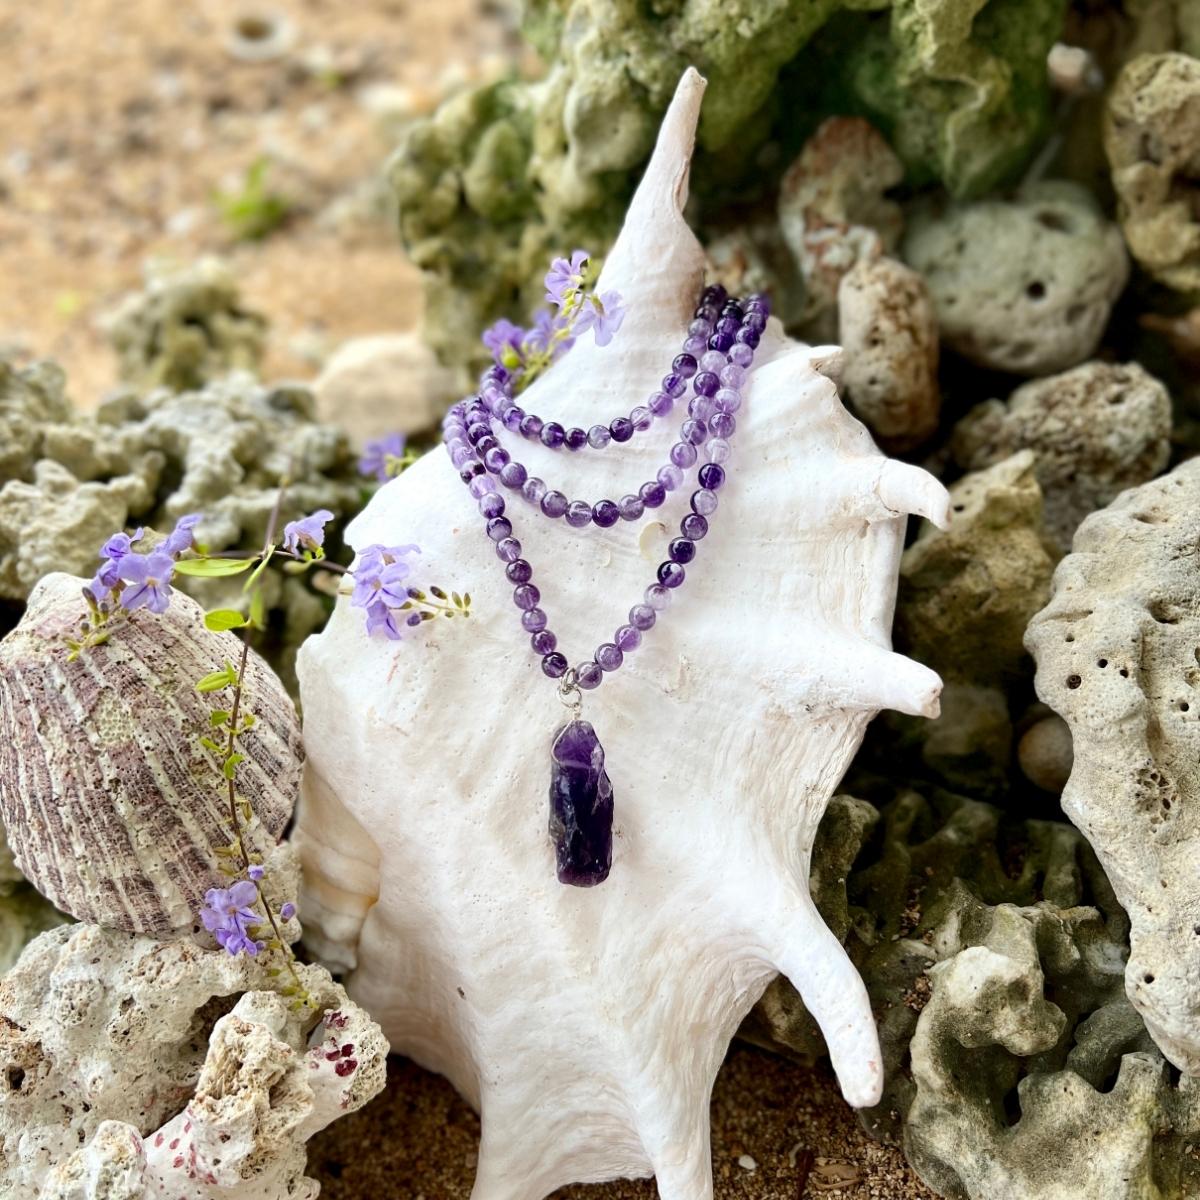 Rustic Amethyst Crystal Necklace to Help Reduce Stress, Emotional Stability and Inner Strength, a great crystal to Help Make Good Decisions